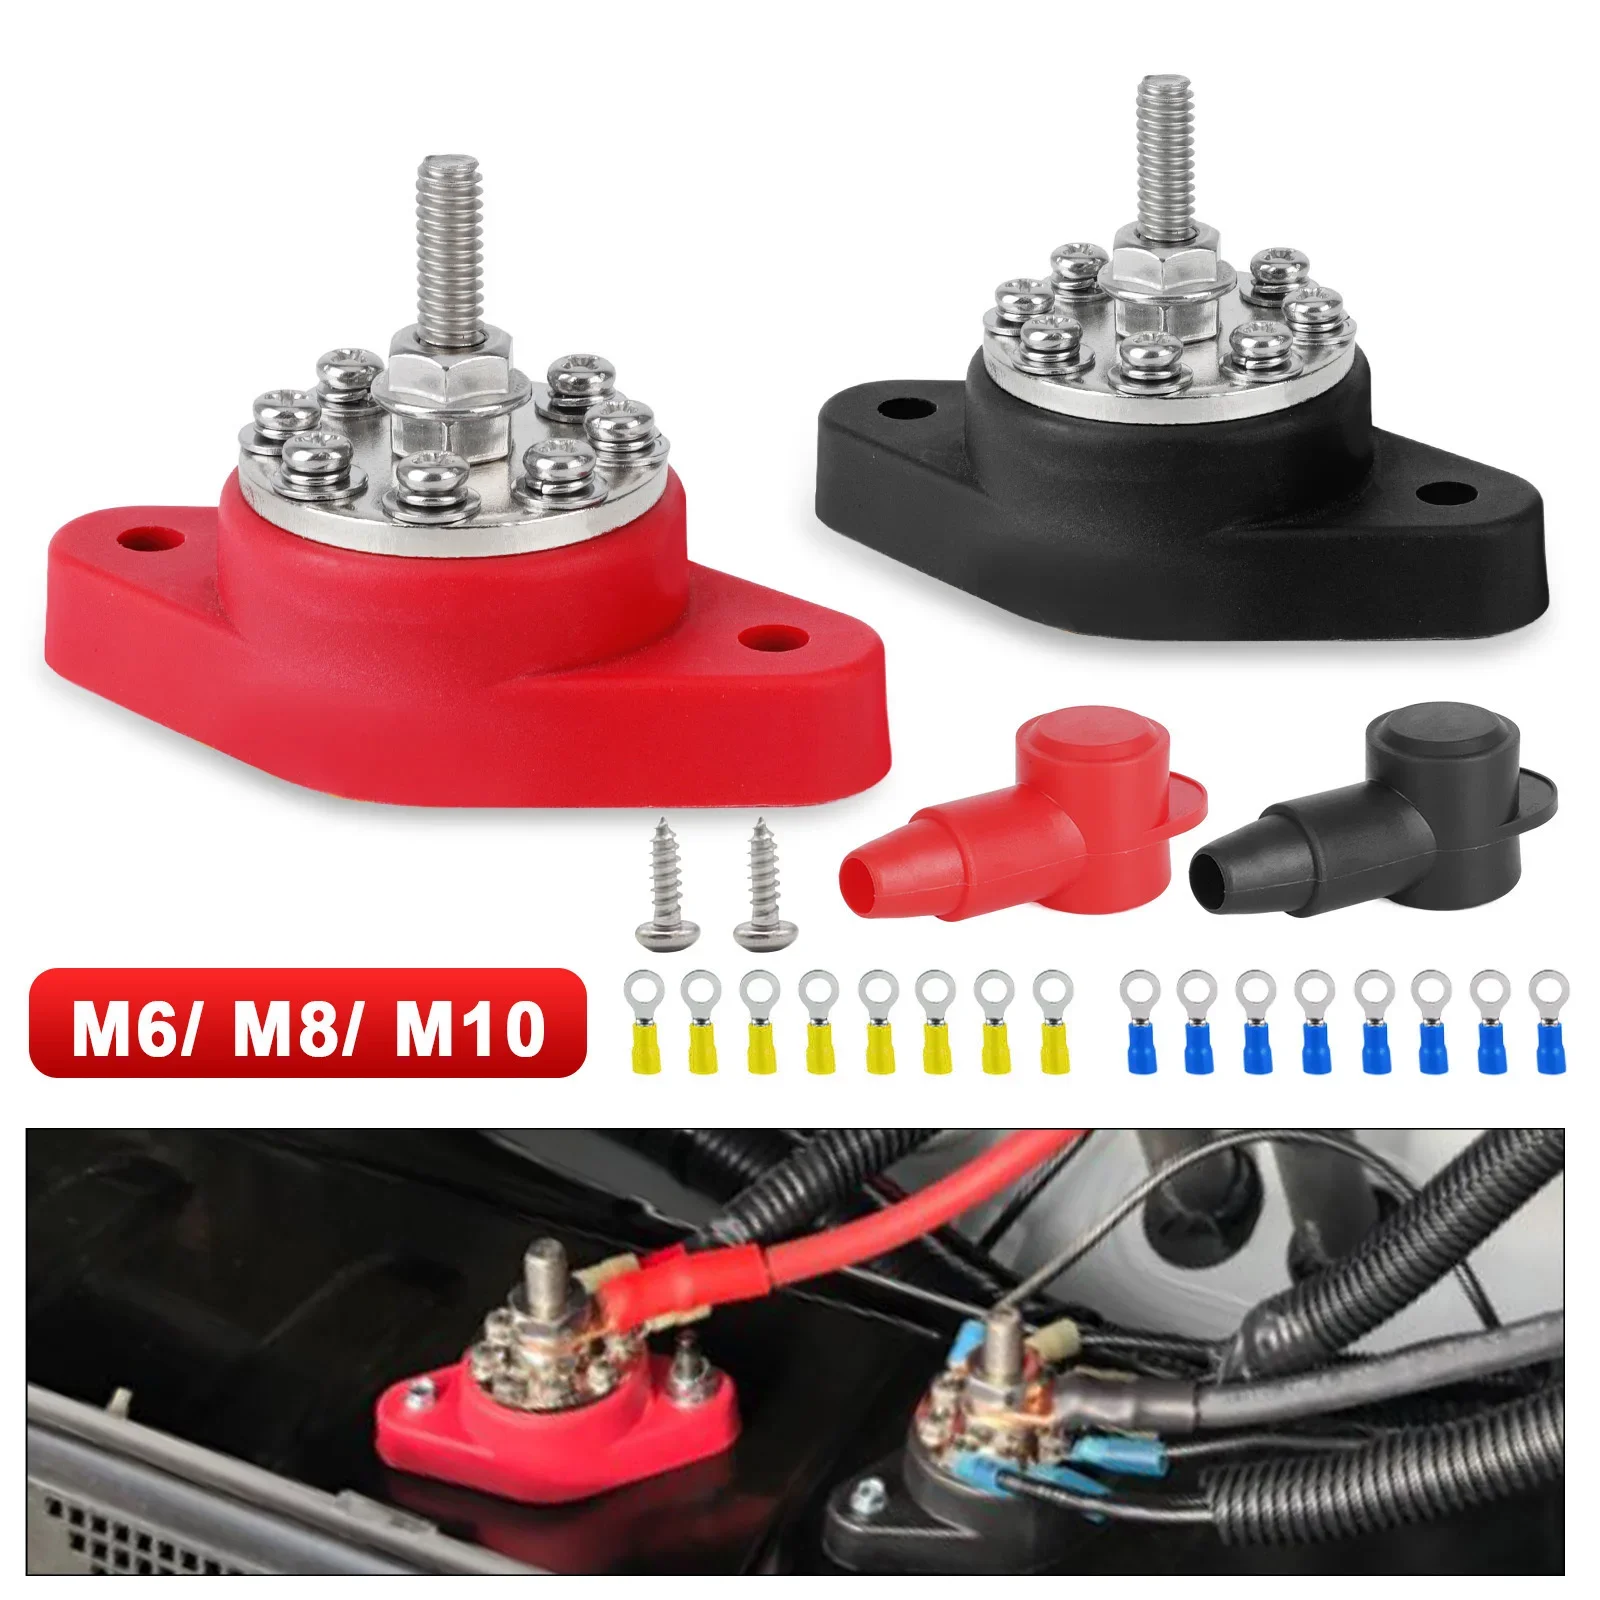 

Heavy Duty Bus Bar M10 M8 M6 Battery Terminal Block Stud with Protector 12V Power Distribution Stud for Truck RV Boat Camper Car